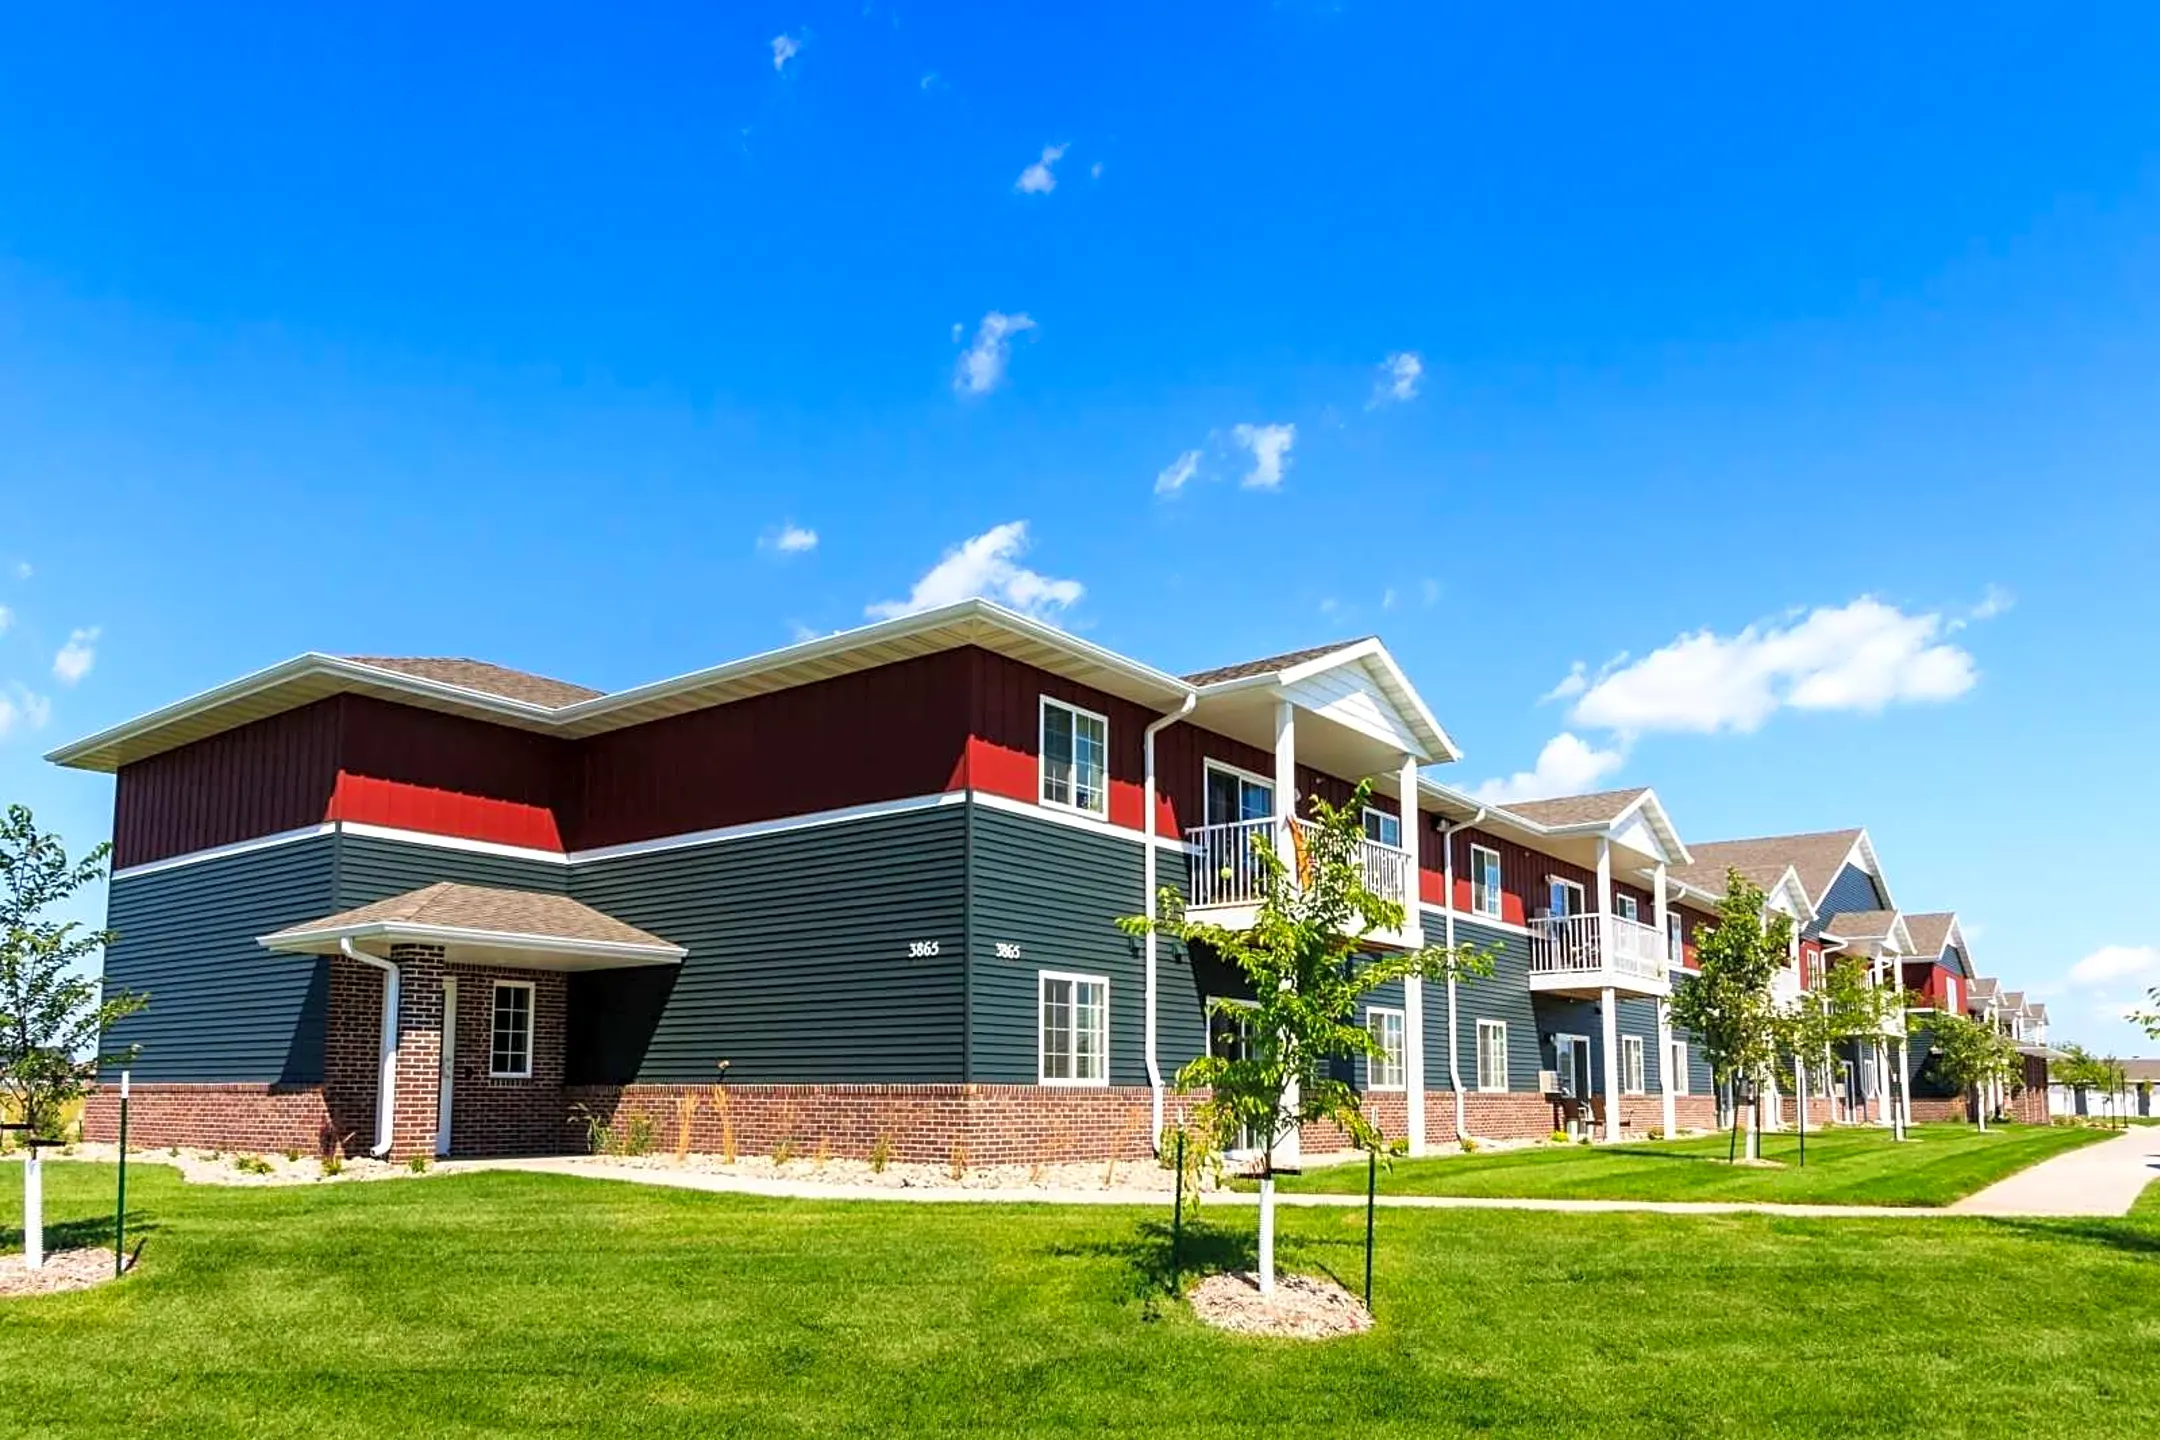 Building - Dakota Commons Townhomes and Apartments - West Fargo, ND